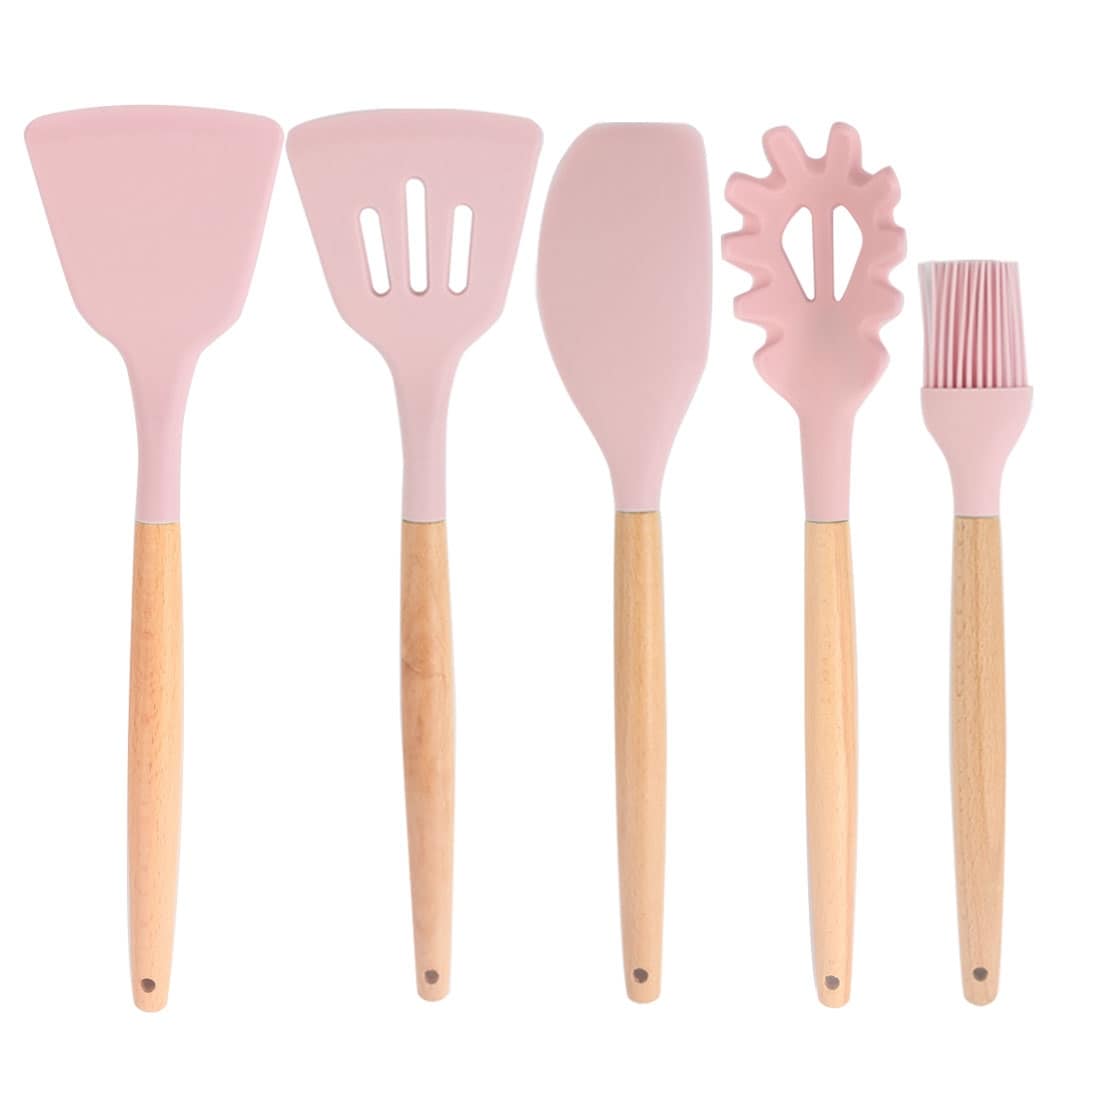 https://ak1.ostkcdn.com/images/products/is/images/direct/54ee3aab4ac0d5876d3df7b0d32363f25f14d84d/5pcs-Silicone-Spatula-Set-Heat-Resistant-Non-scratch-Kitchen-Cooking.jpg